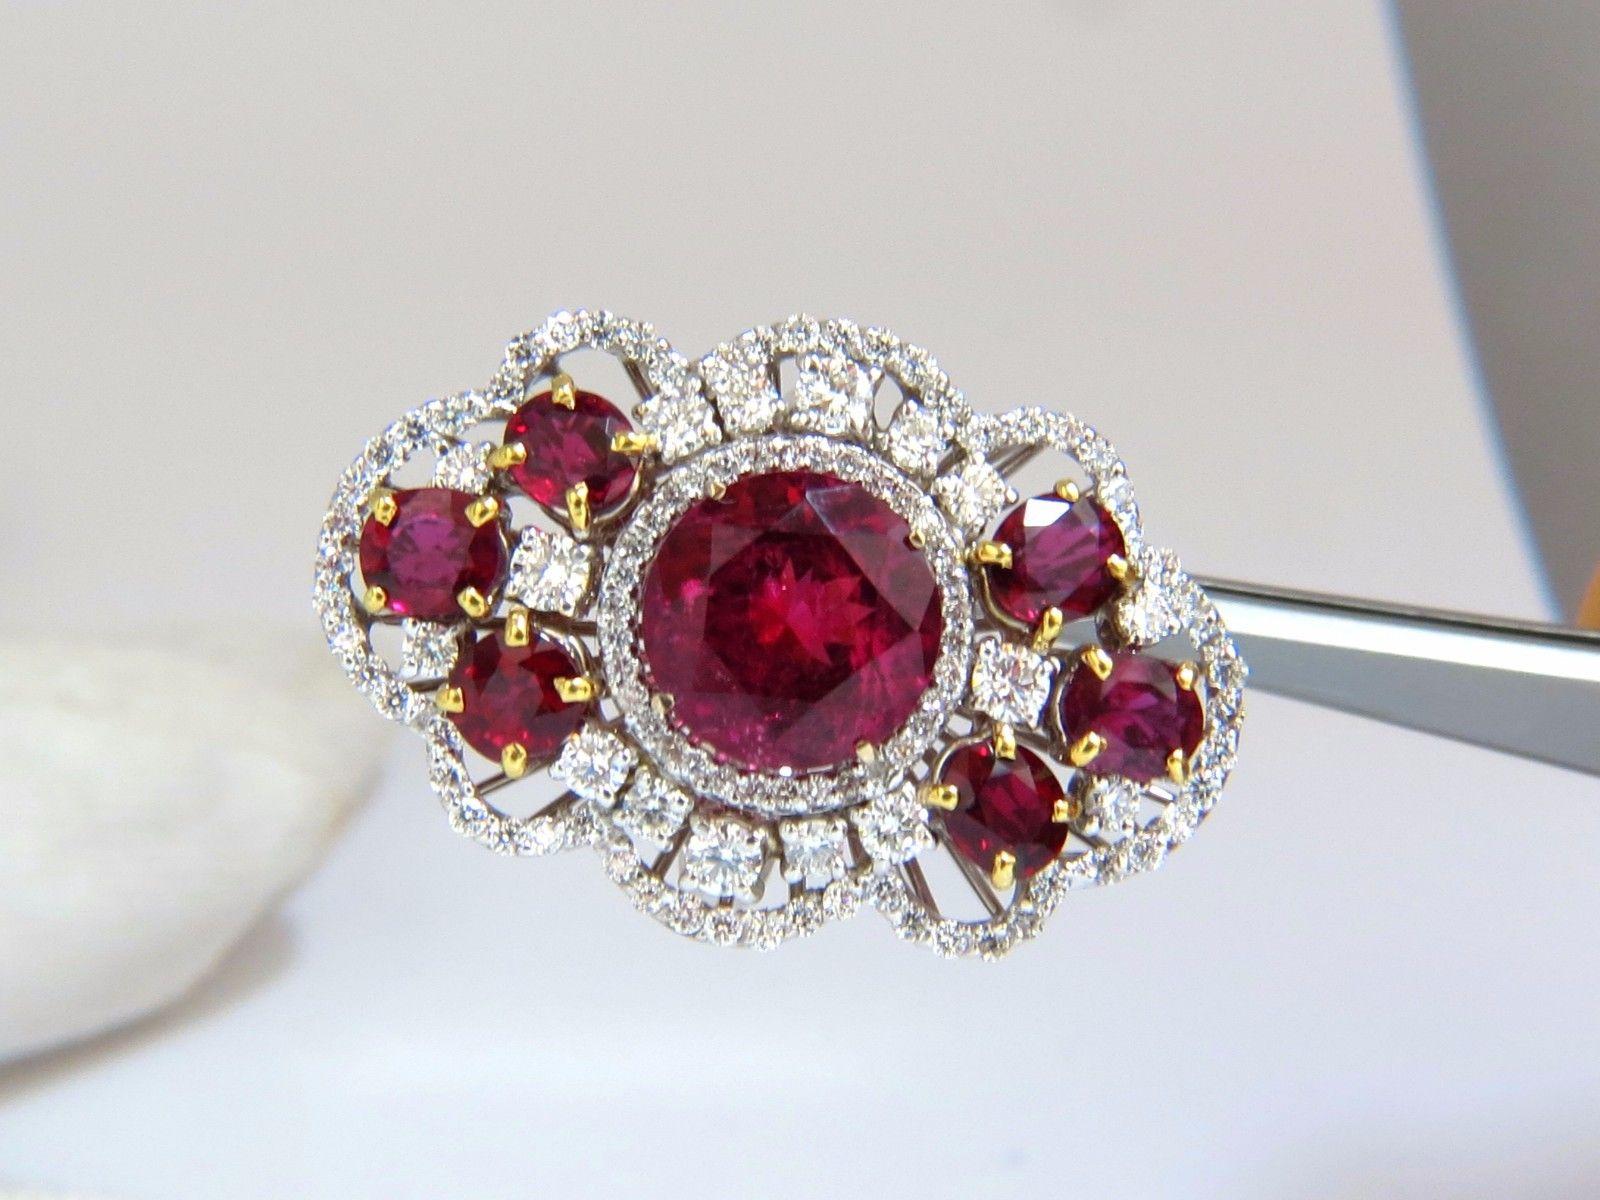 Oval Cut GIA Certified 8.03CT Natural Tourmaline Rubellite Ruby Diamond Cluster Ring 18K For Sale